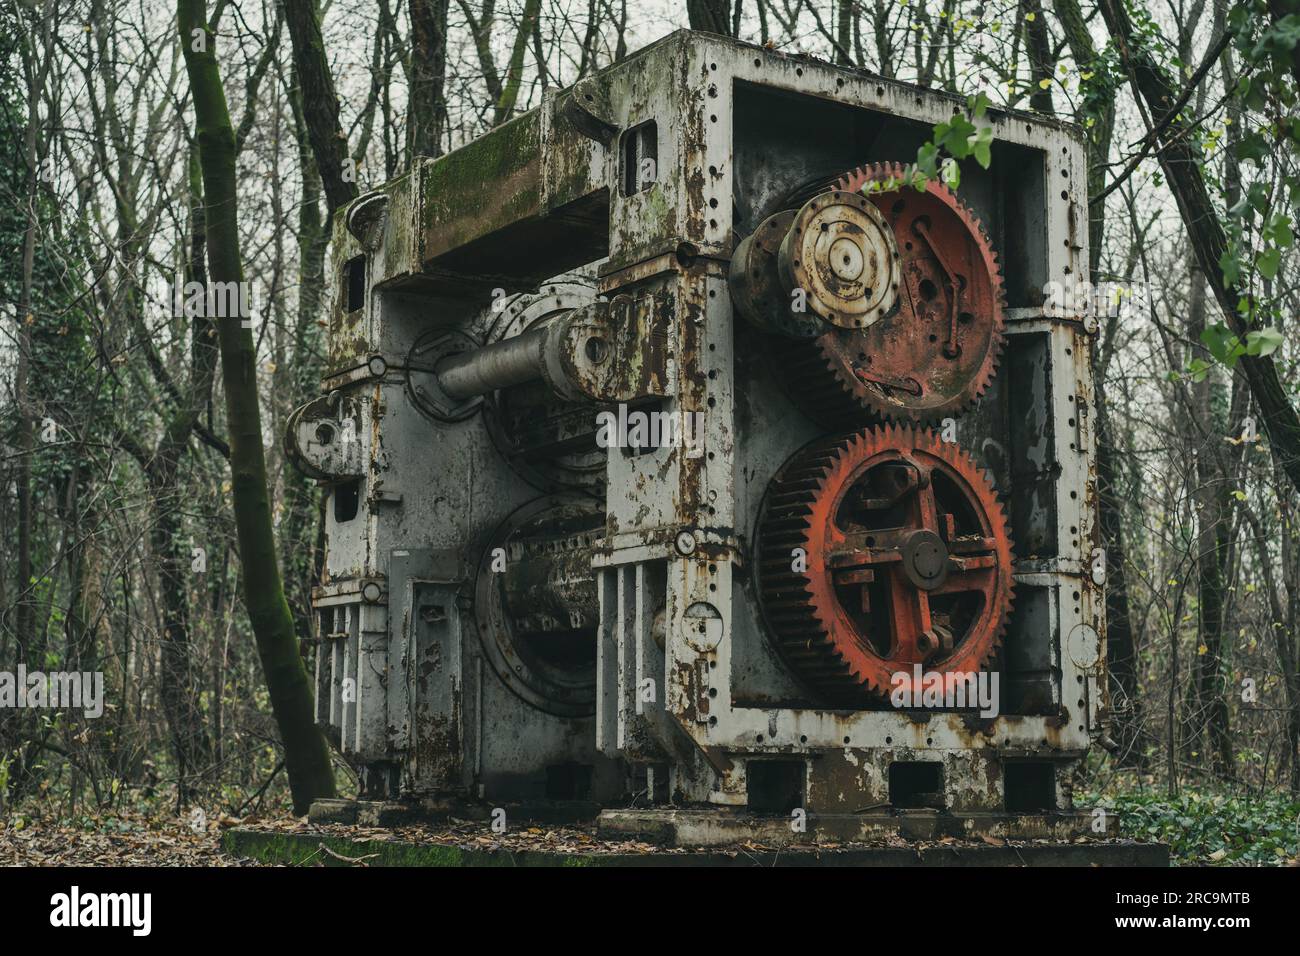 An old abandoned sheet metal working machine in the forest. Iron and steel production. Industrial history machine. Red gears. Stock Photo